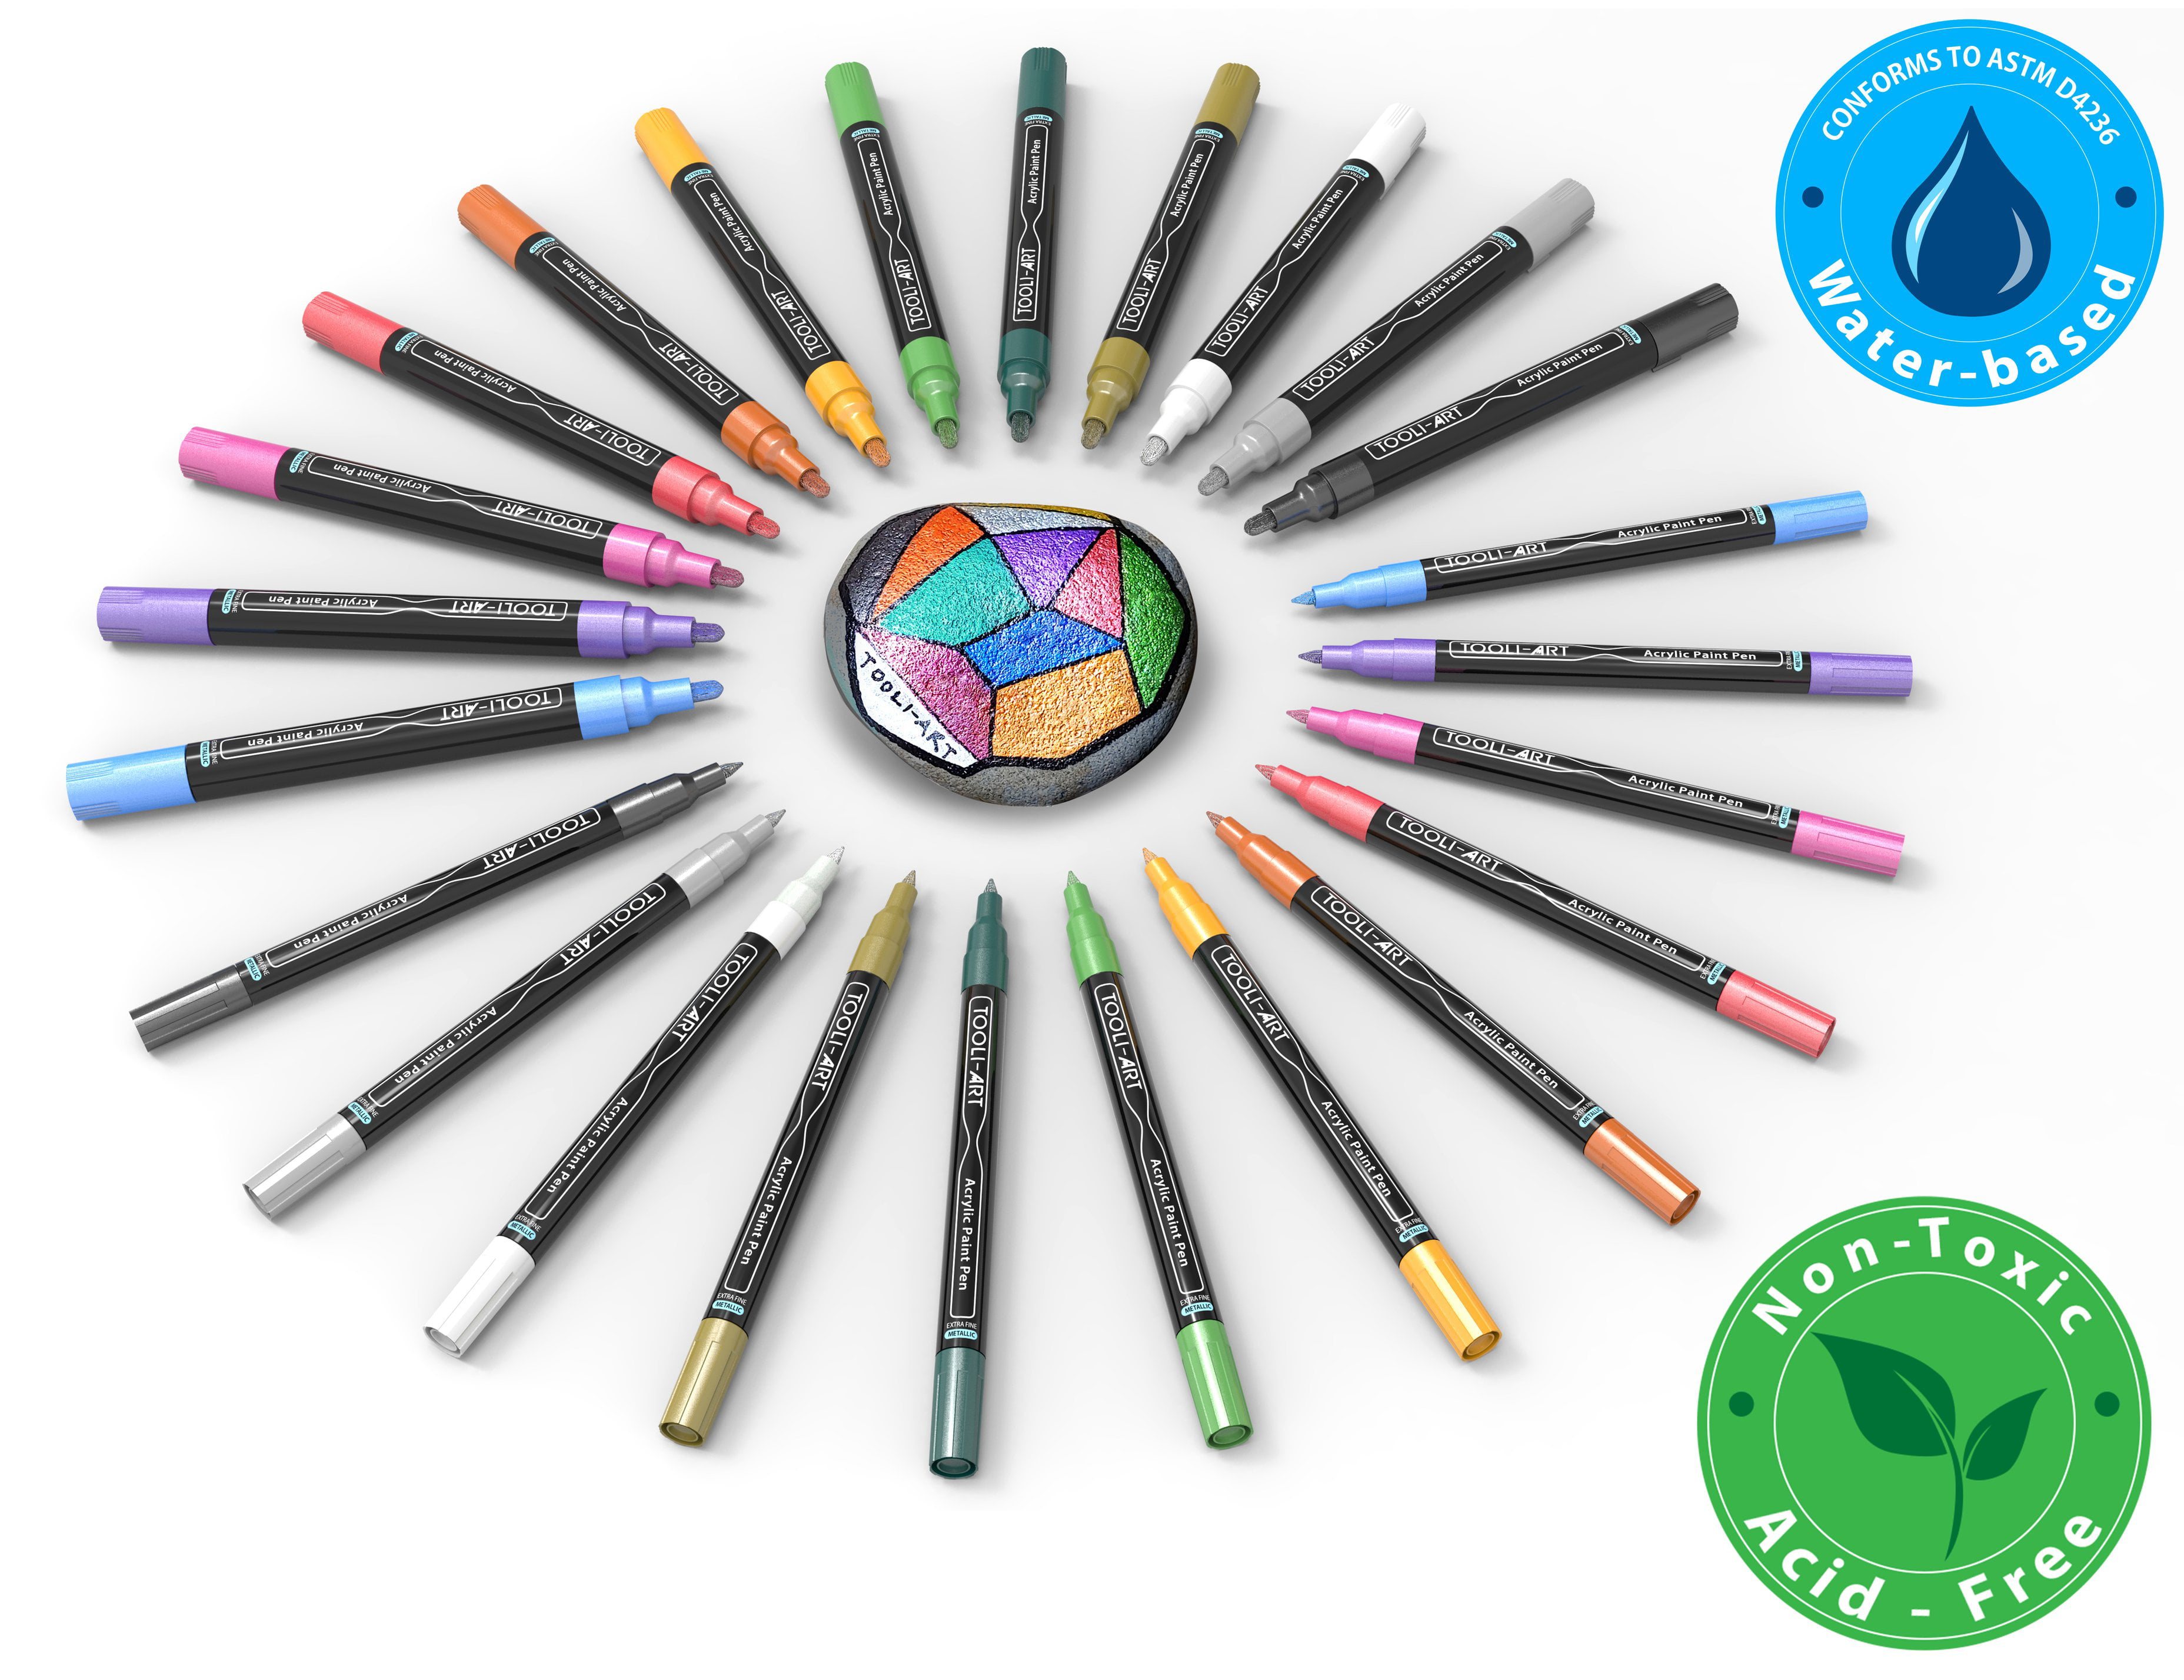  TOOLI-ART Acrylic Paint Pens Assorted Vibrant Markers for Rock  Painting, Canvas, Glass, Mugs, Wood, Fabric, Metal, Ceramics. Non Toxic,  Quick Dry, Multi-Surface, Lightfast (EXTRA FINE) : Arts, Crafts & Sewing